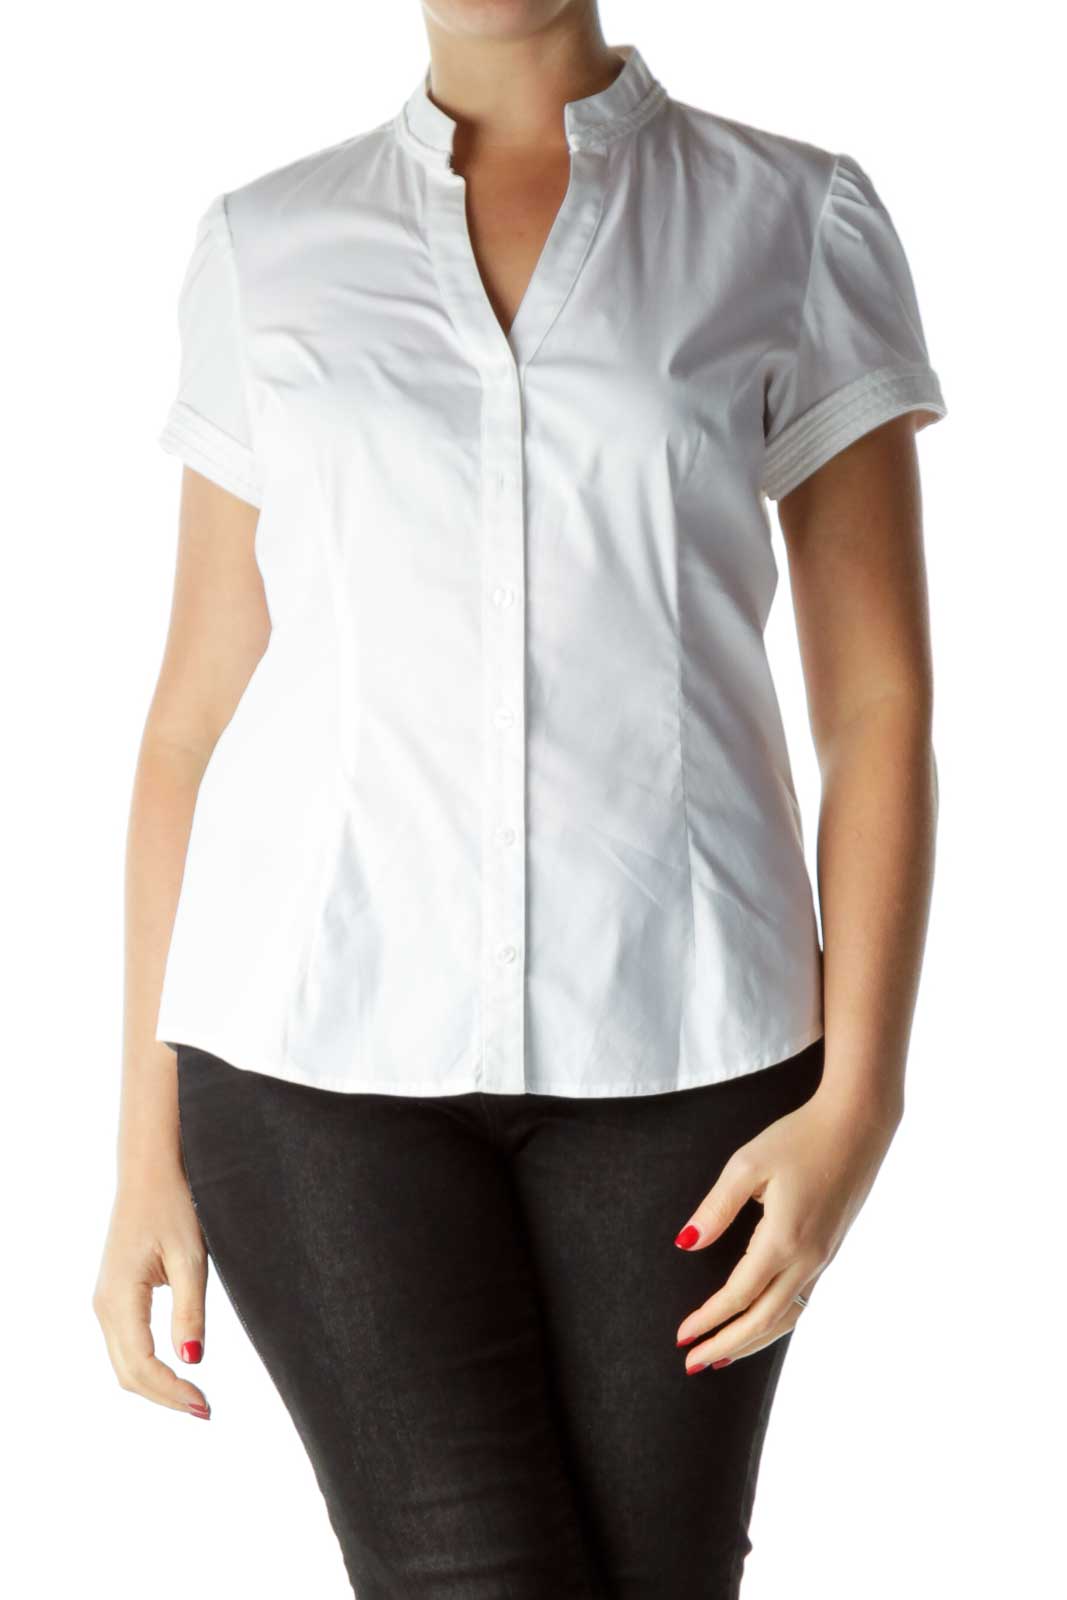 White Short Sleeve Collared Shirt Front